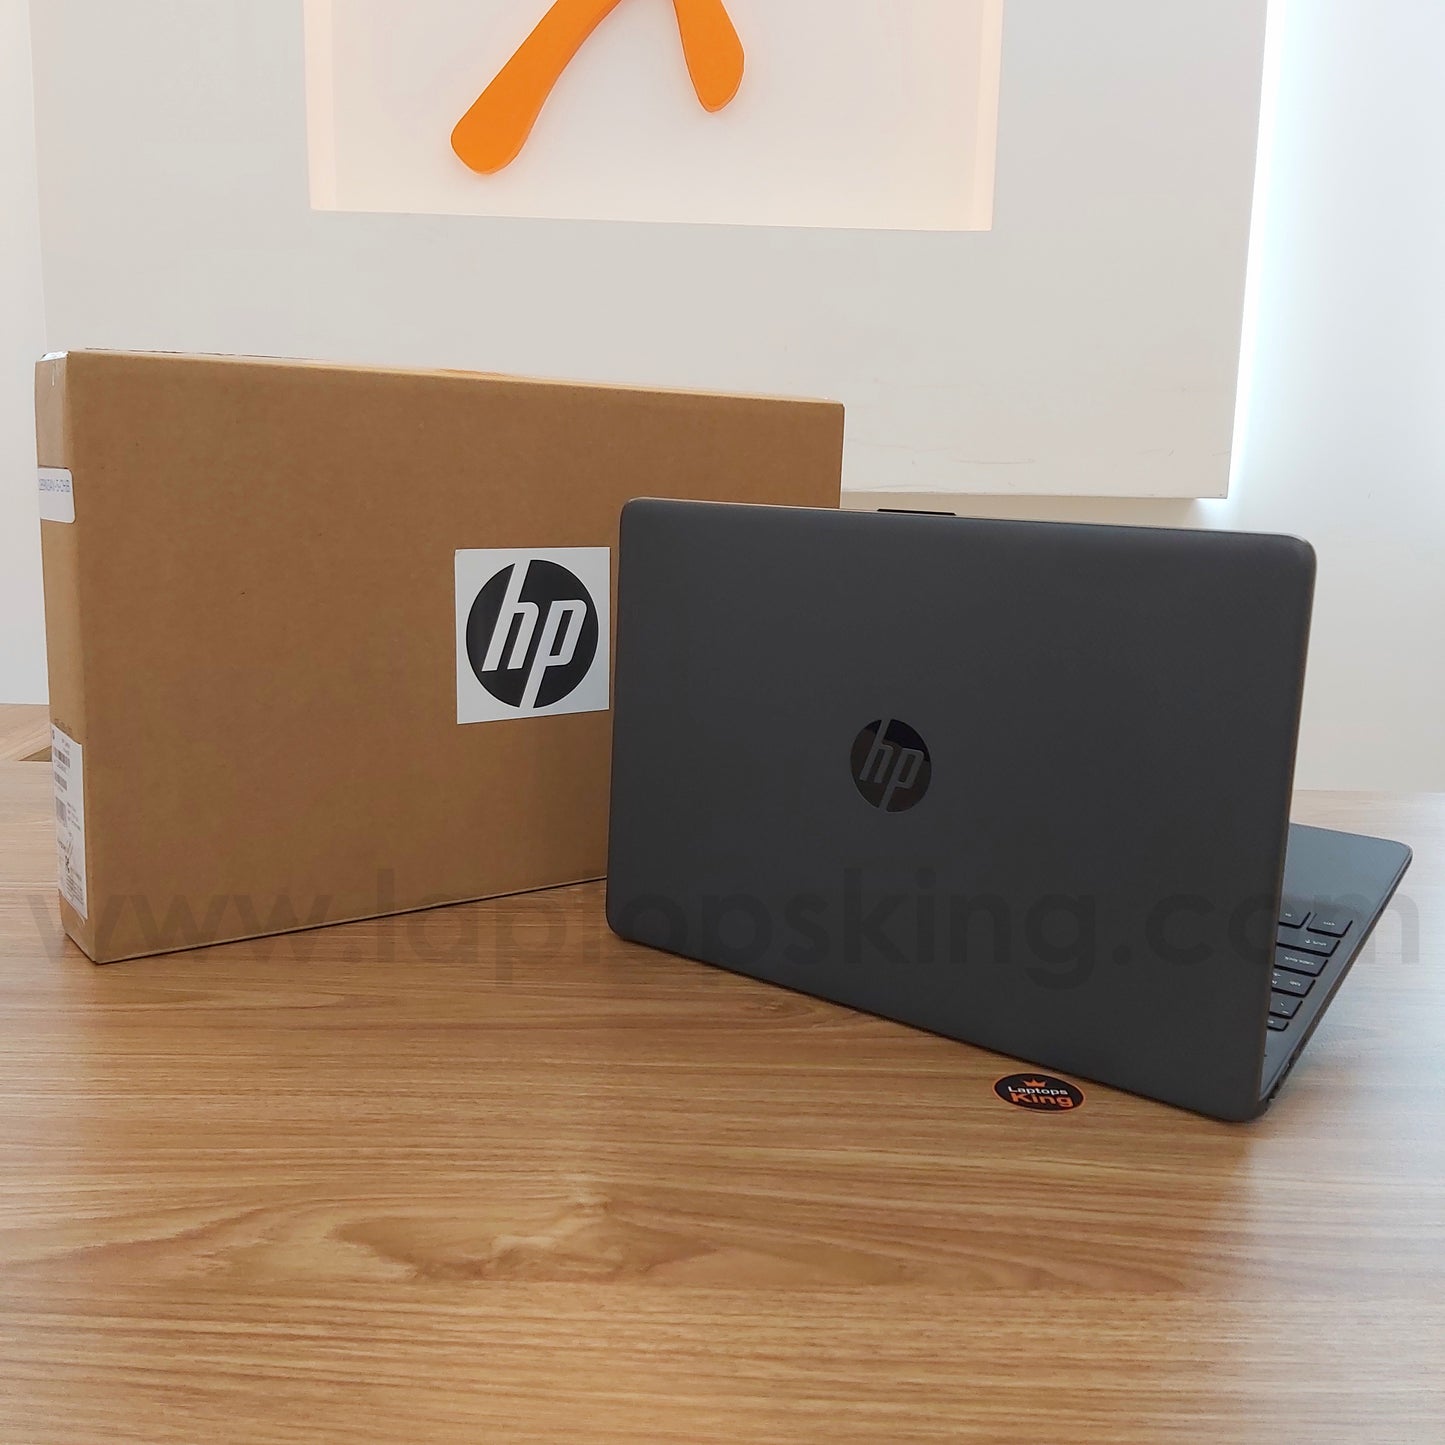 HP 15T-DW300 Core i7-1165G7 Iris Xe Touch Laptop Offers (Brand New)